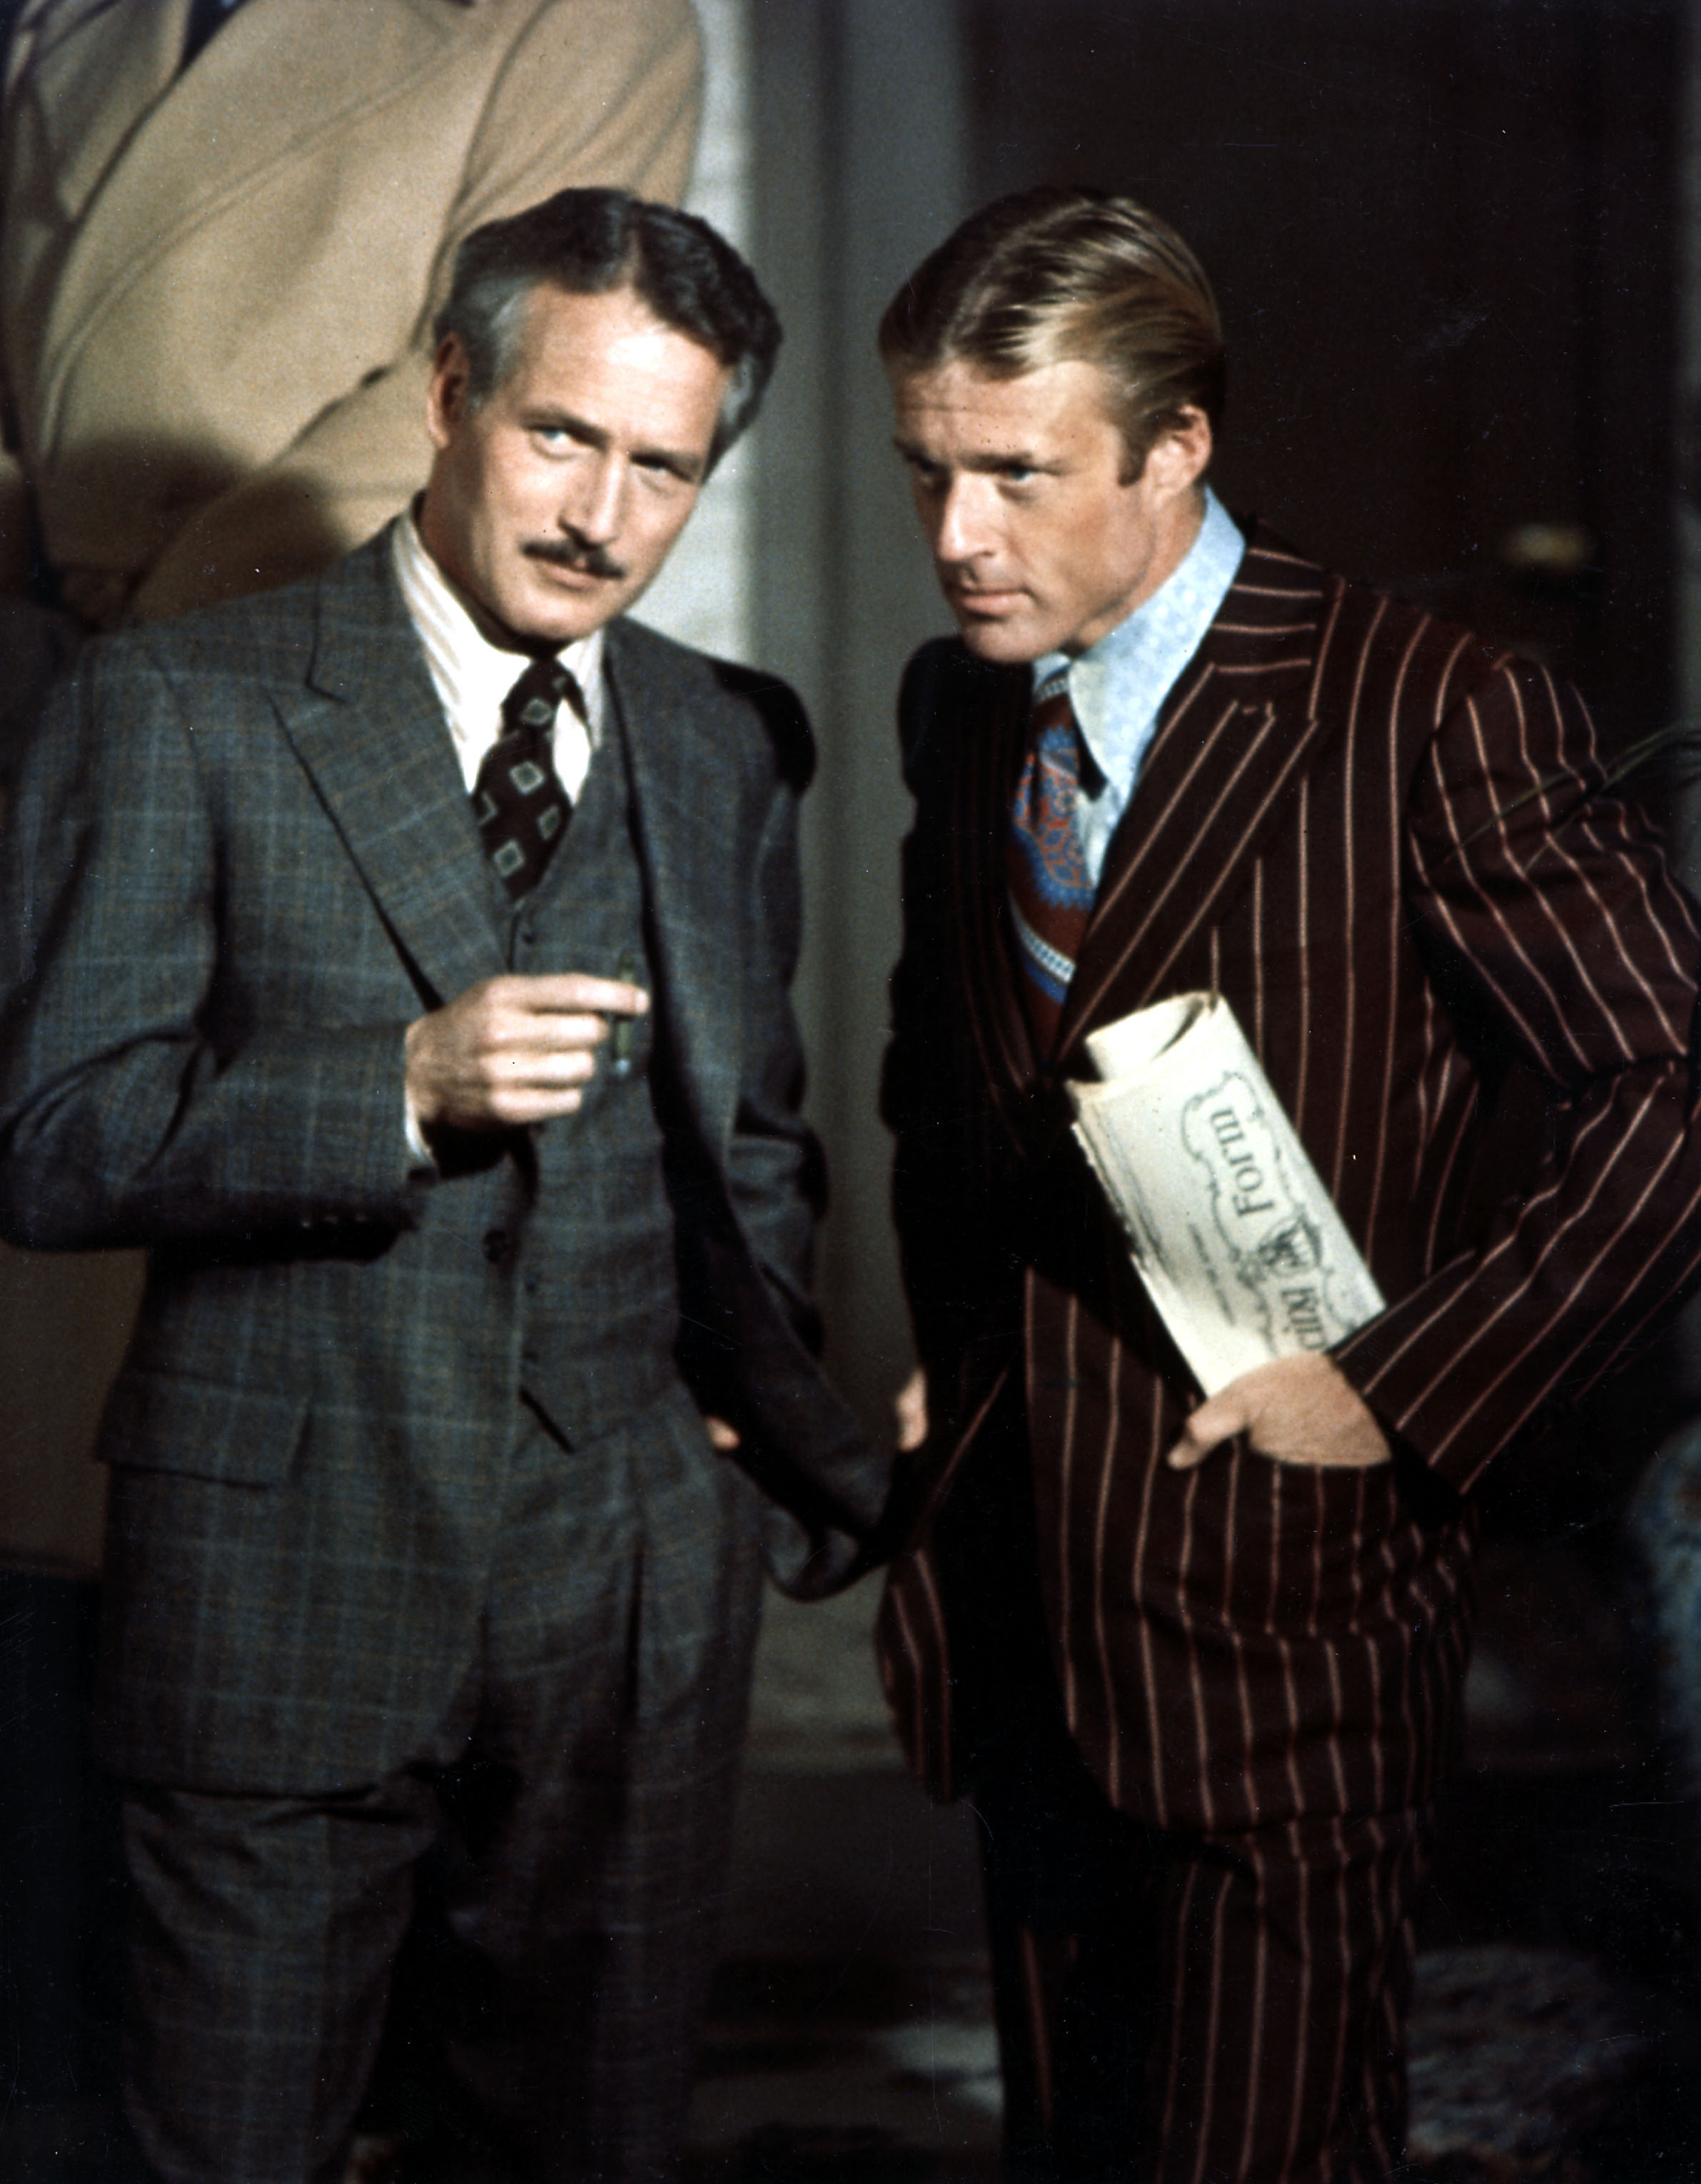 in ‘the sting,’ redford and newman were on equal footing. that’s rare.